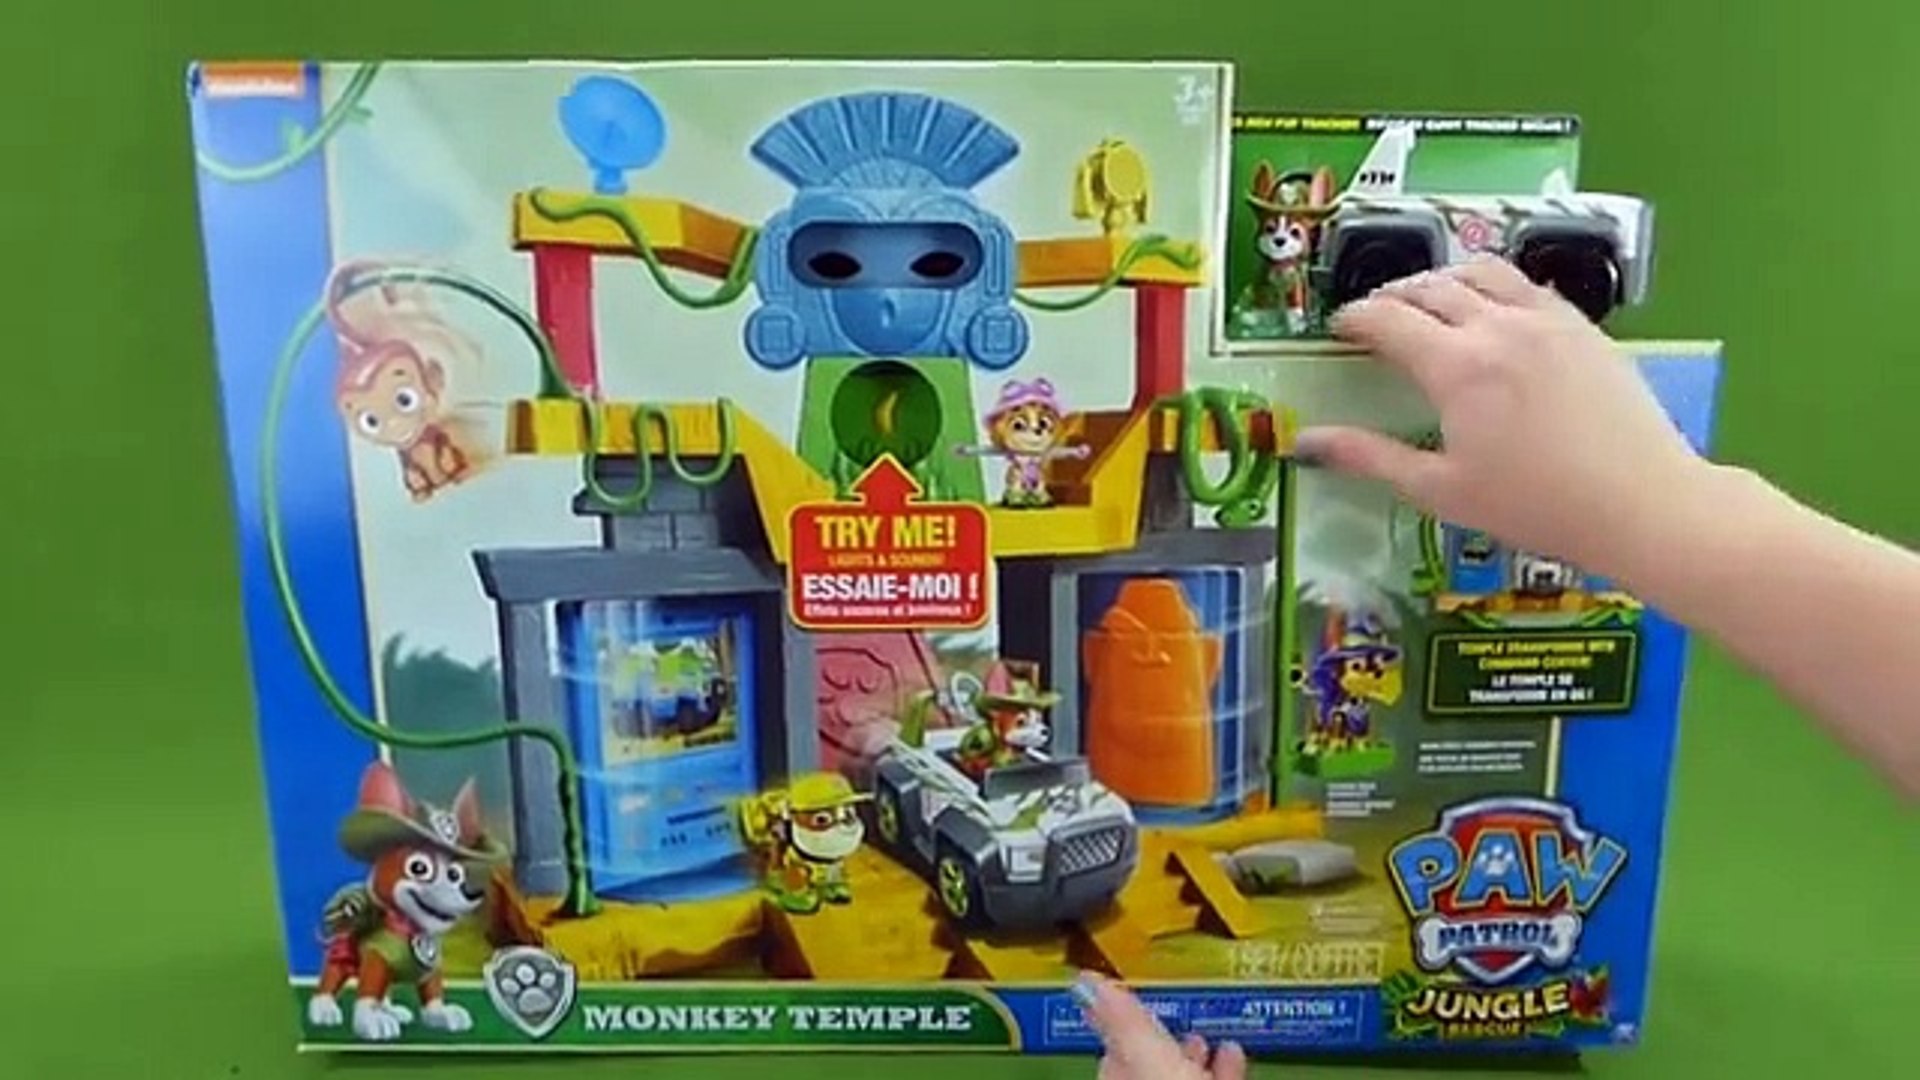 Paw Patrol Jungle Rescue Monkey Temple with Tracker and Mandy Patroller Chase Marshall - Dailymotion